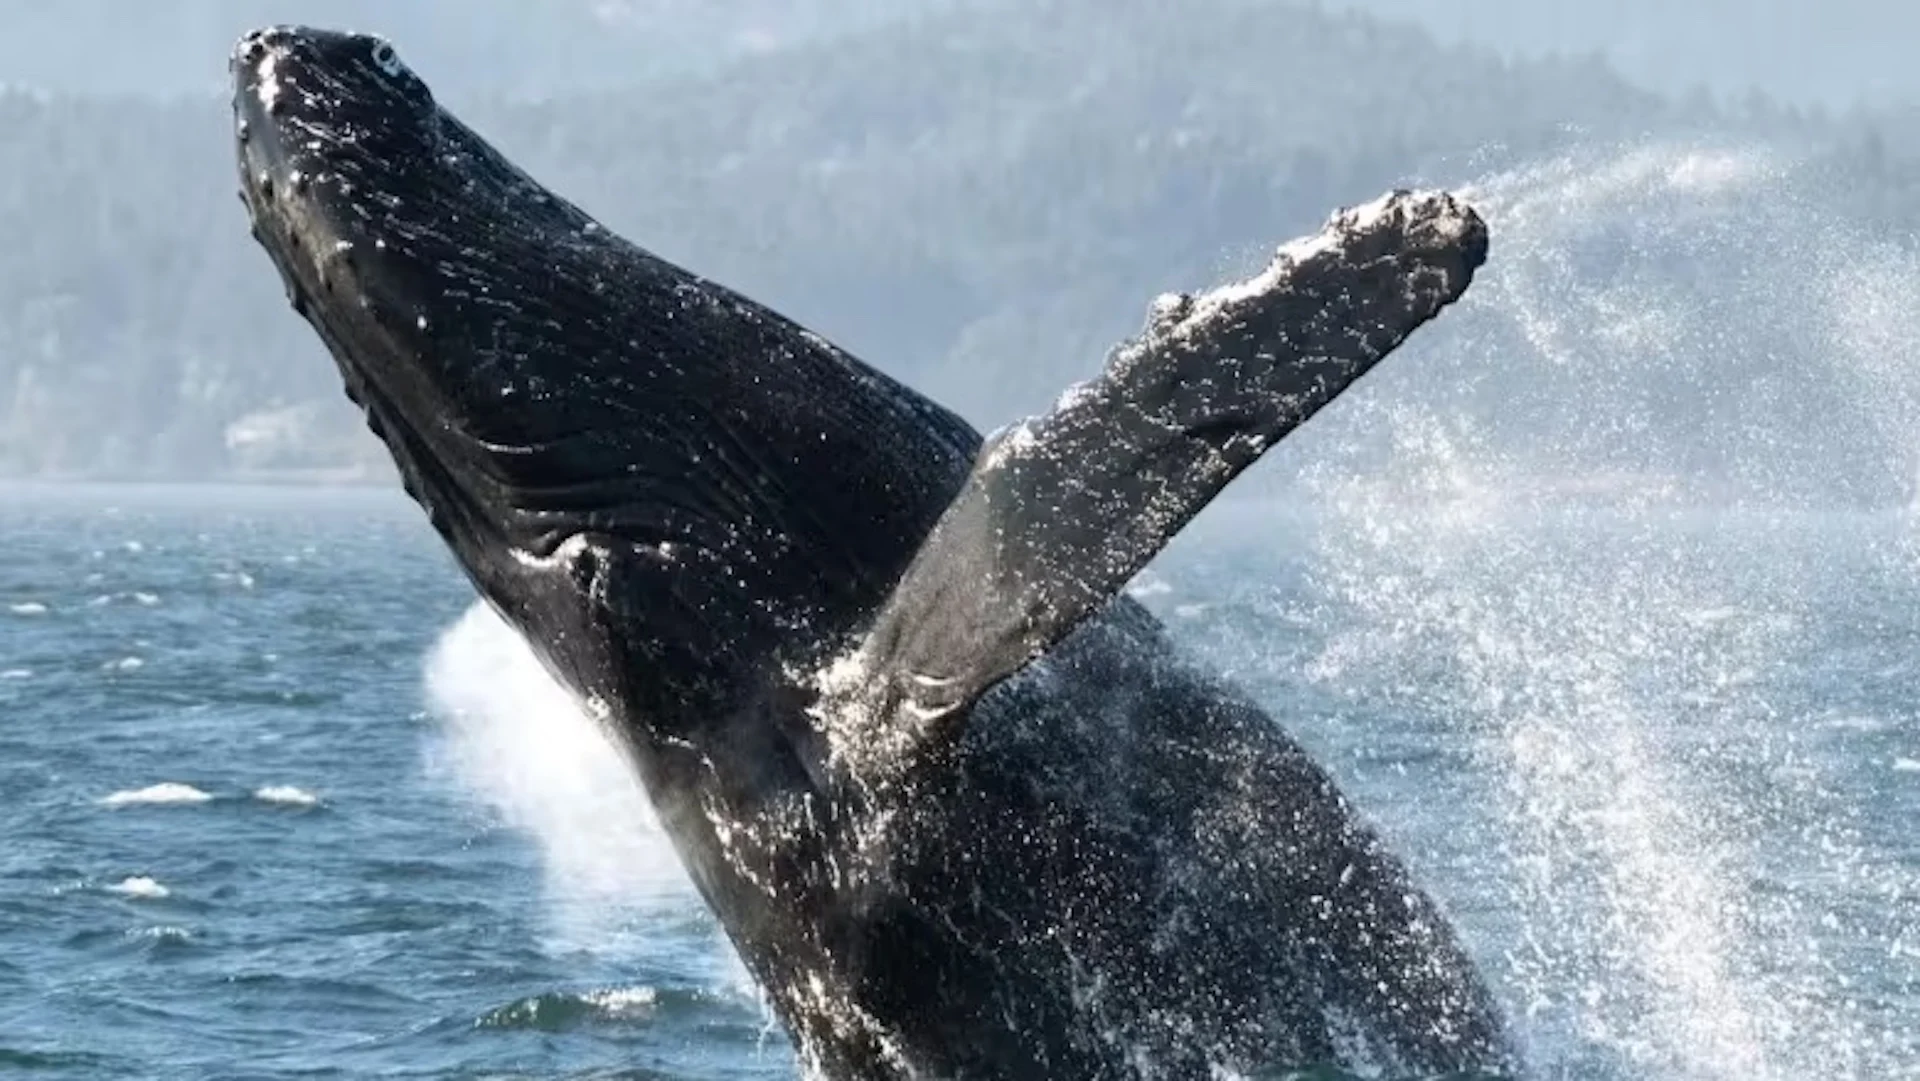 Why have there been more whale sightings in B.C.'s waters?